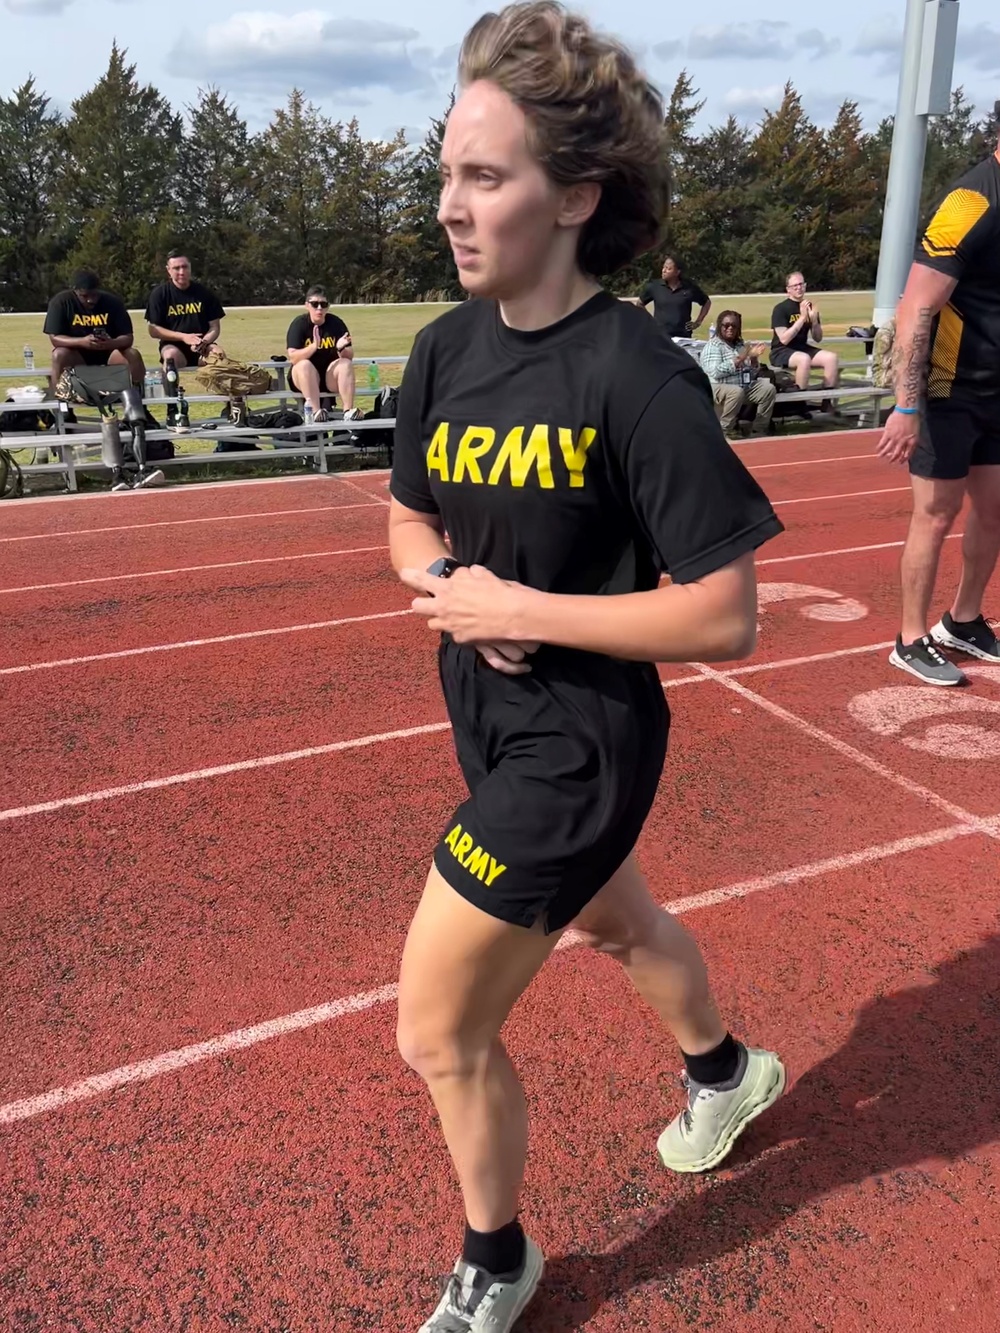 Team Army Ultimate Champion says every day is a new day to get better!